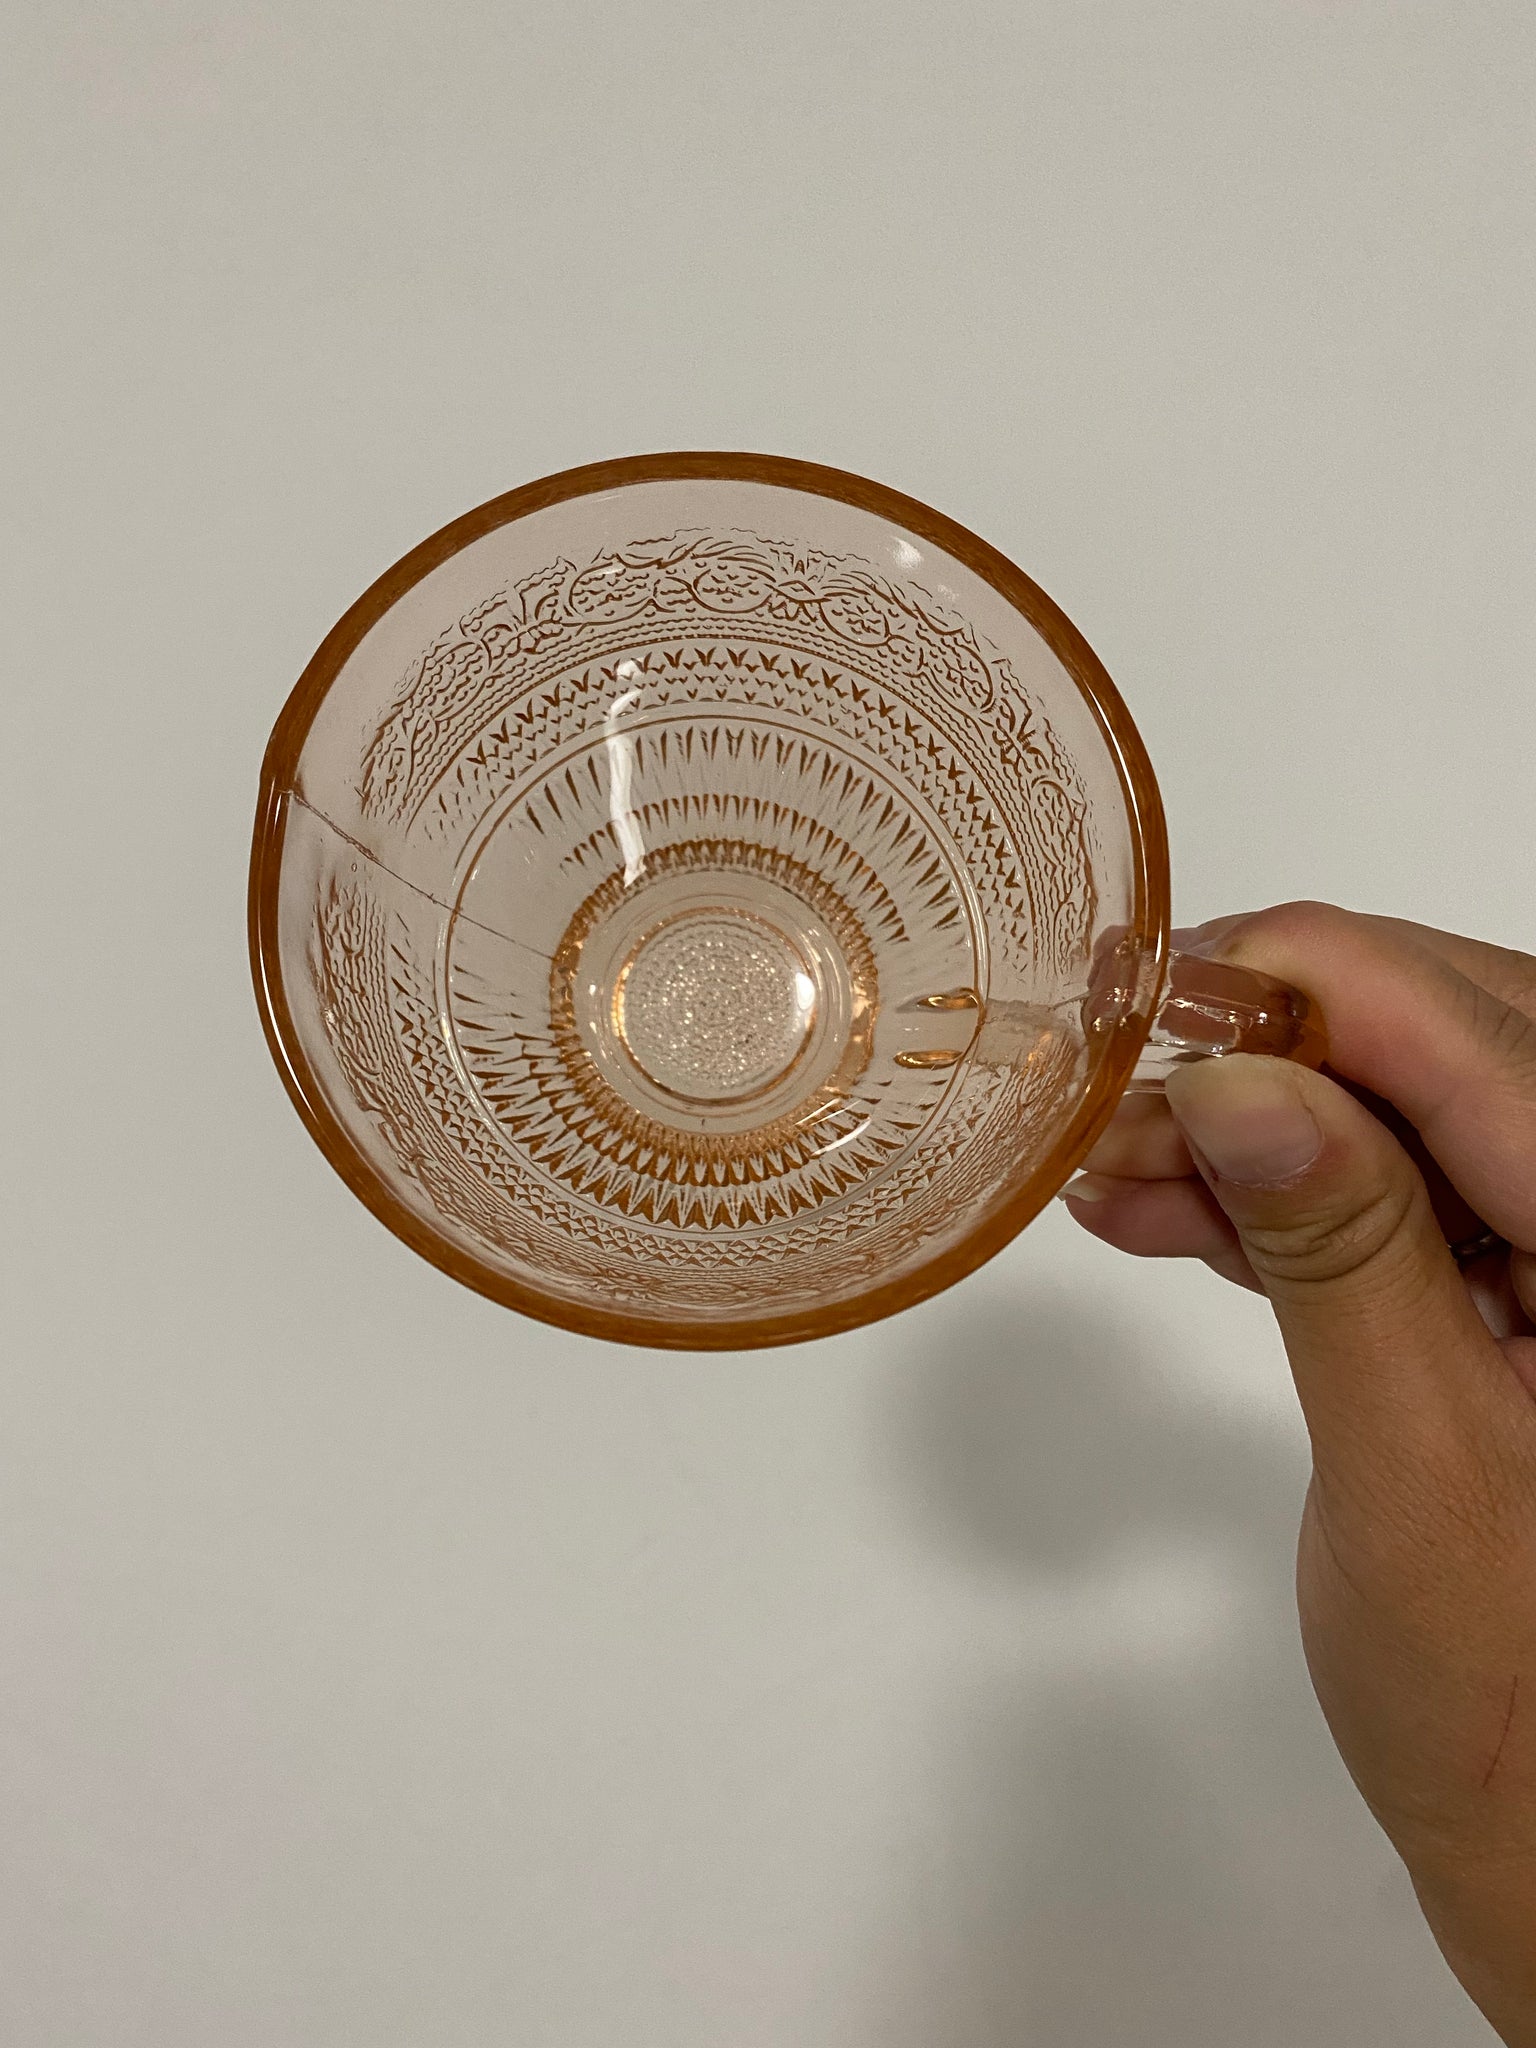 Pink depression glass style cups